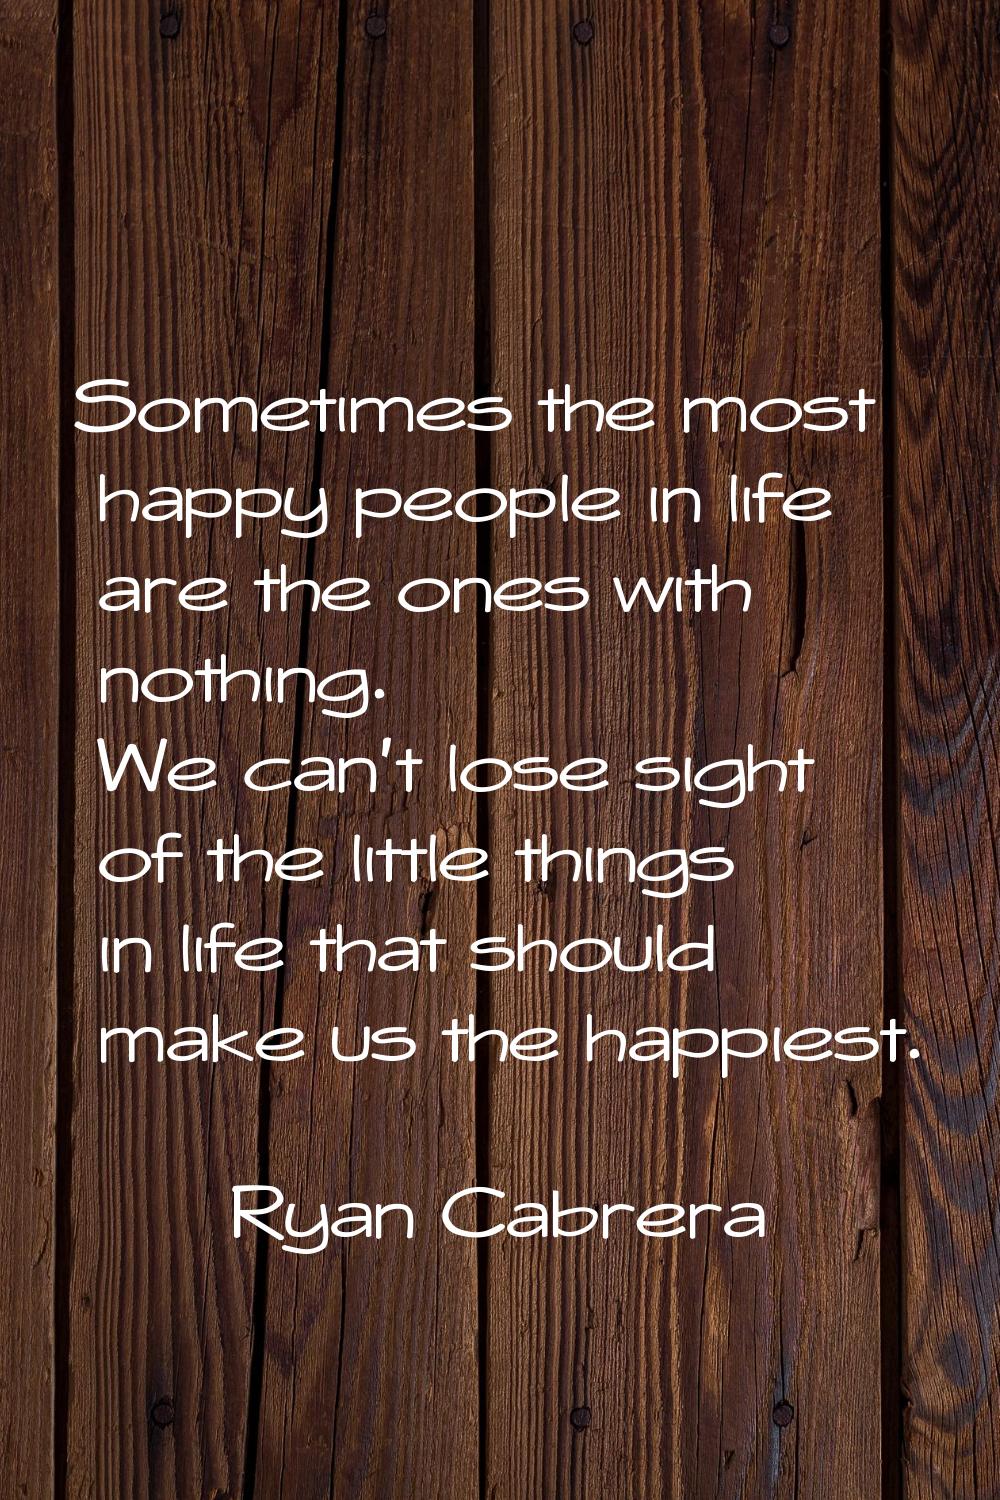 Sometimes the most happy people in life are the ones with nothing. We can't lose sight of the littl